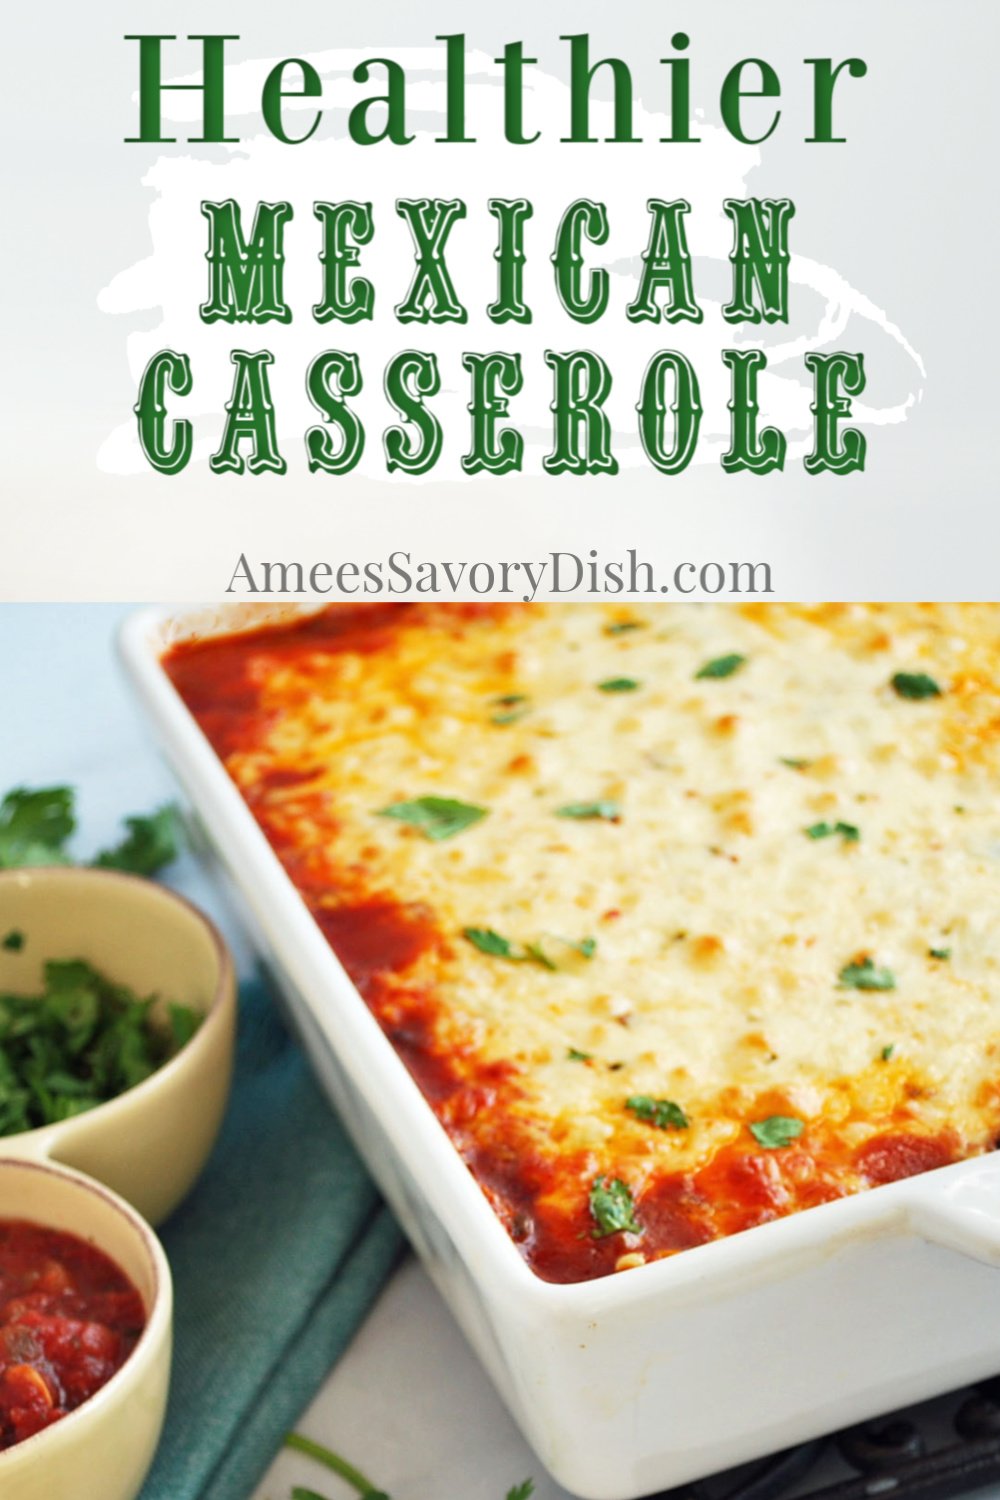 A lightened-up recipe for Mexican casserole made with whole grain corn tortillas, black beans, lean ground beef, and a blend of white cheddar and pepper jack cheese. #mexicancasserole #beefcasserole #mexicanbeefcasserole #healthiermexicancasserole #mexicanrecipes via @Ameessavorydish